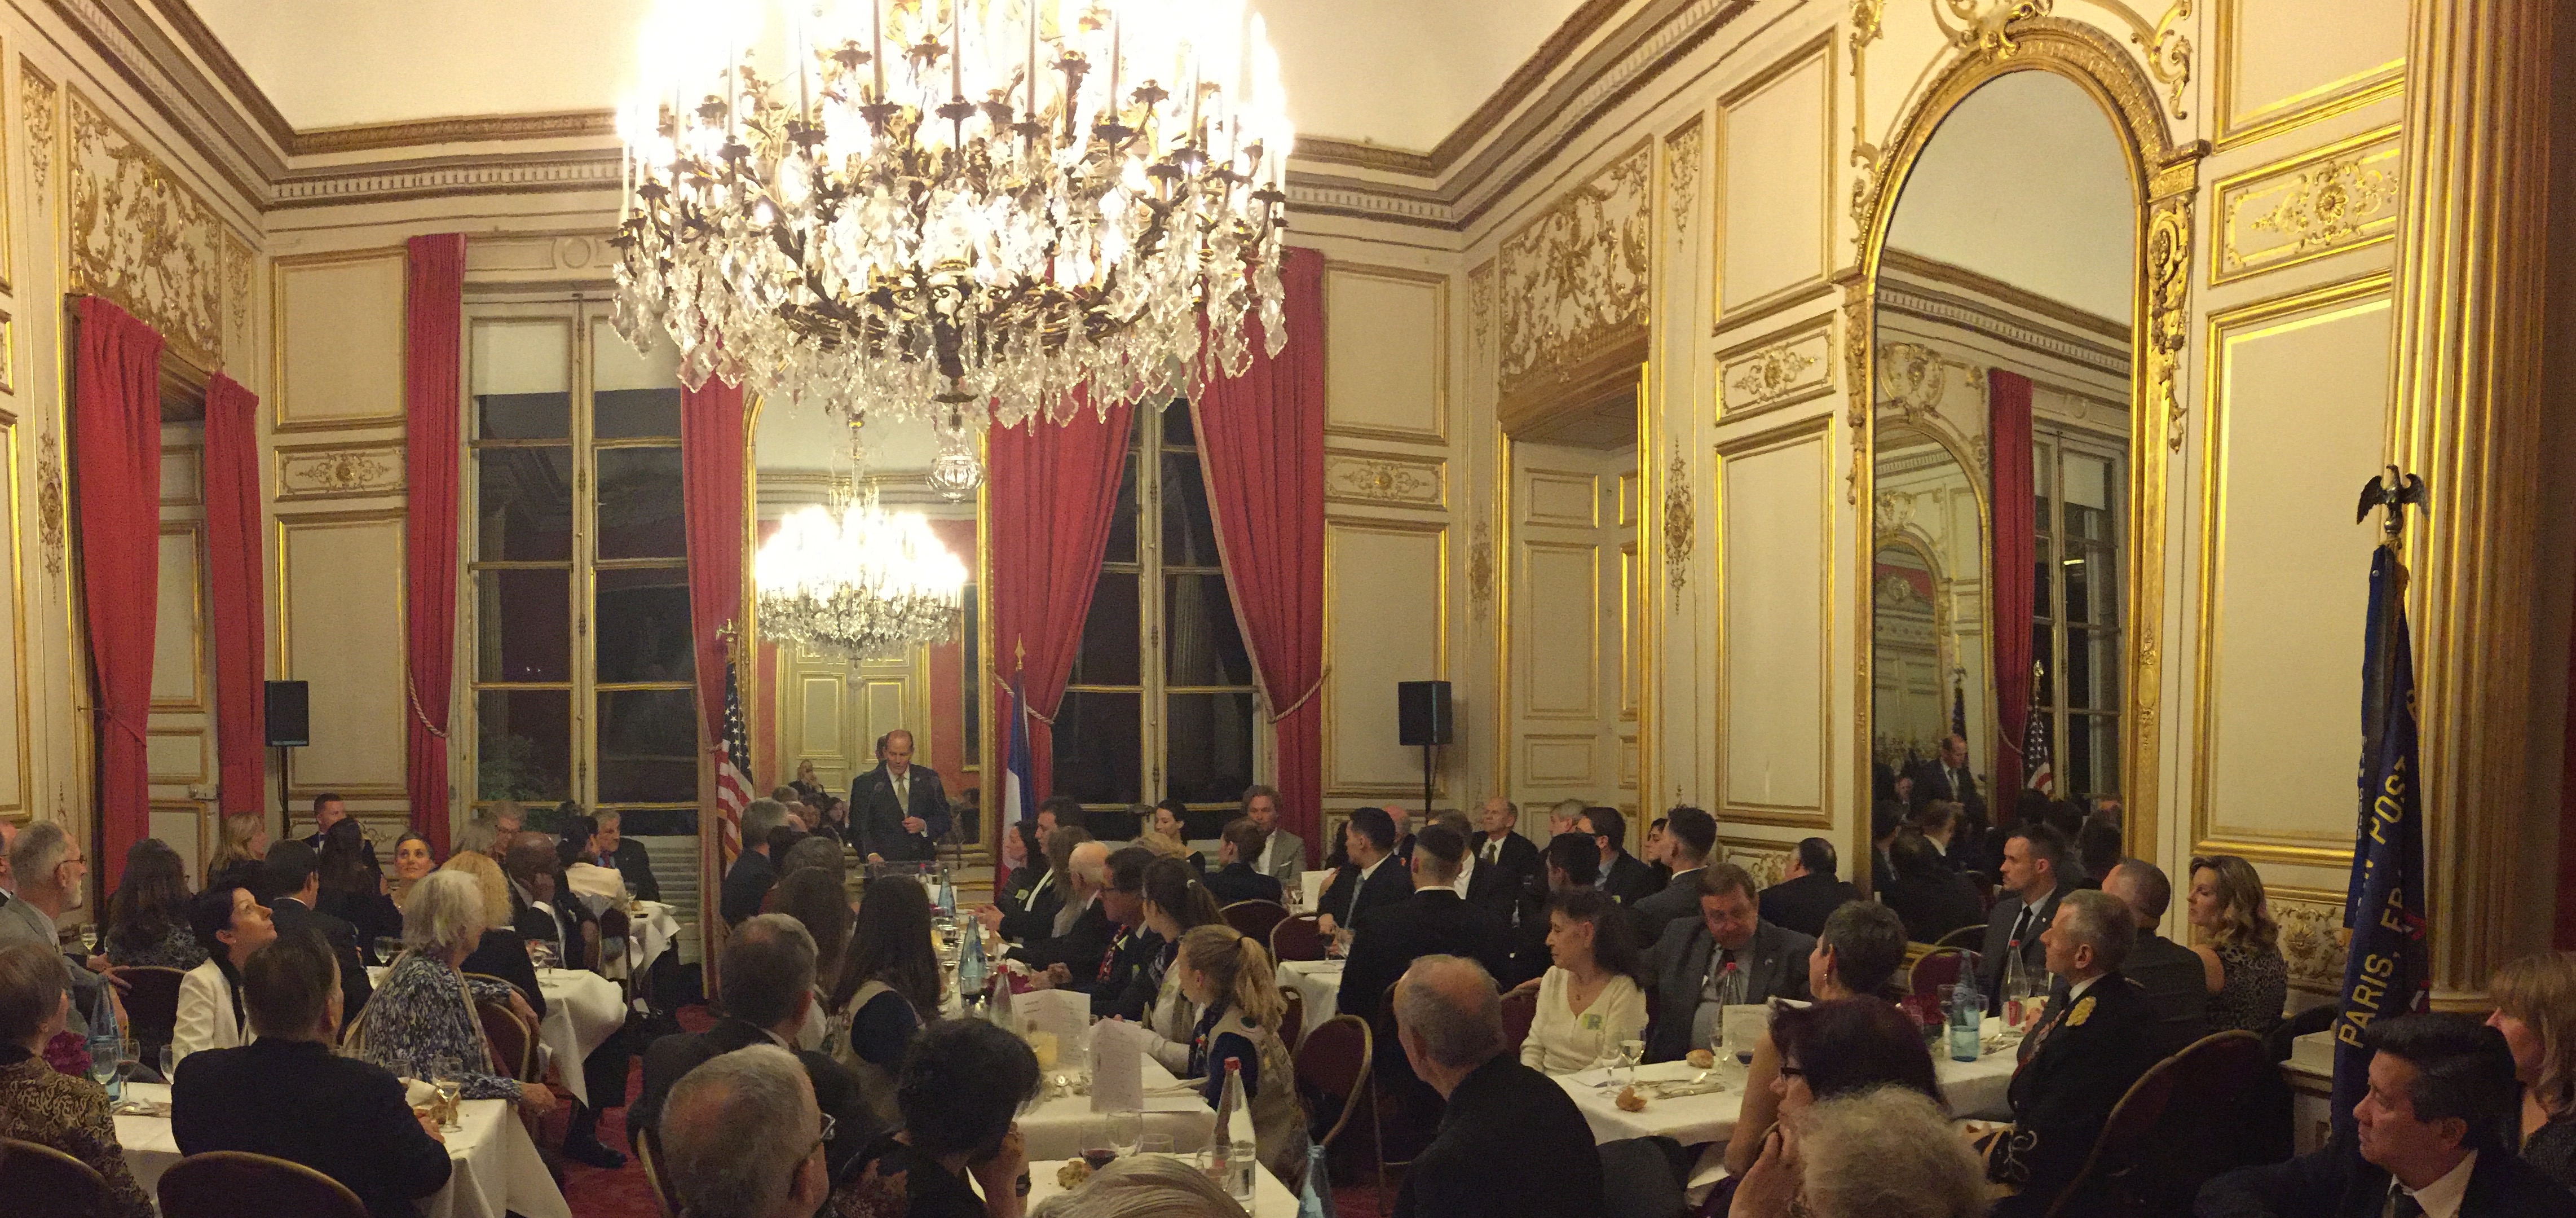 Attendees sit in an ornate room during John Wessel's speech